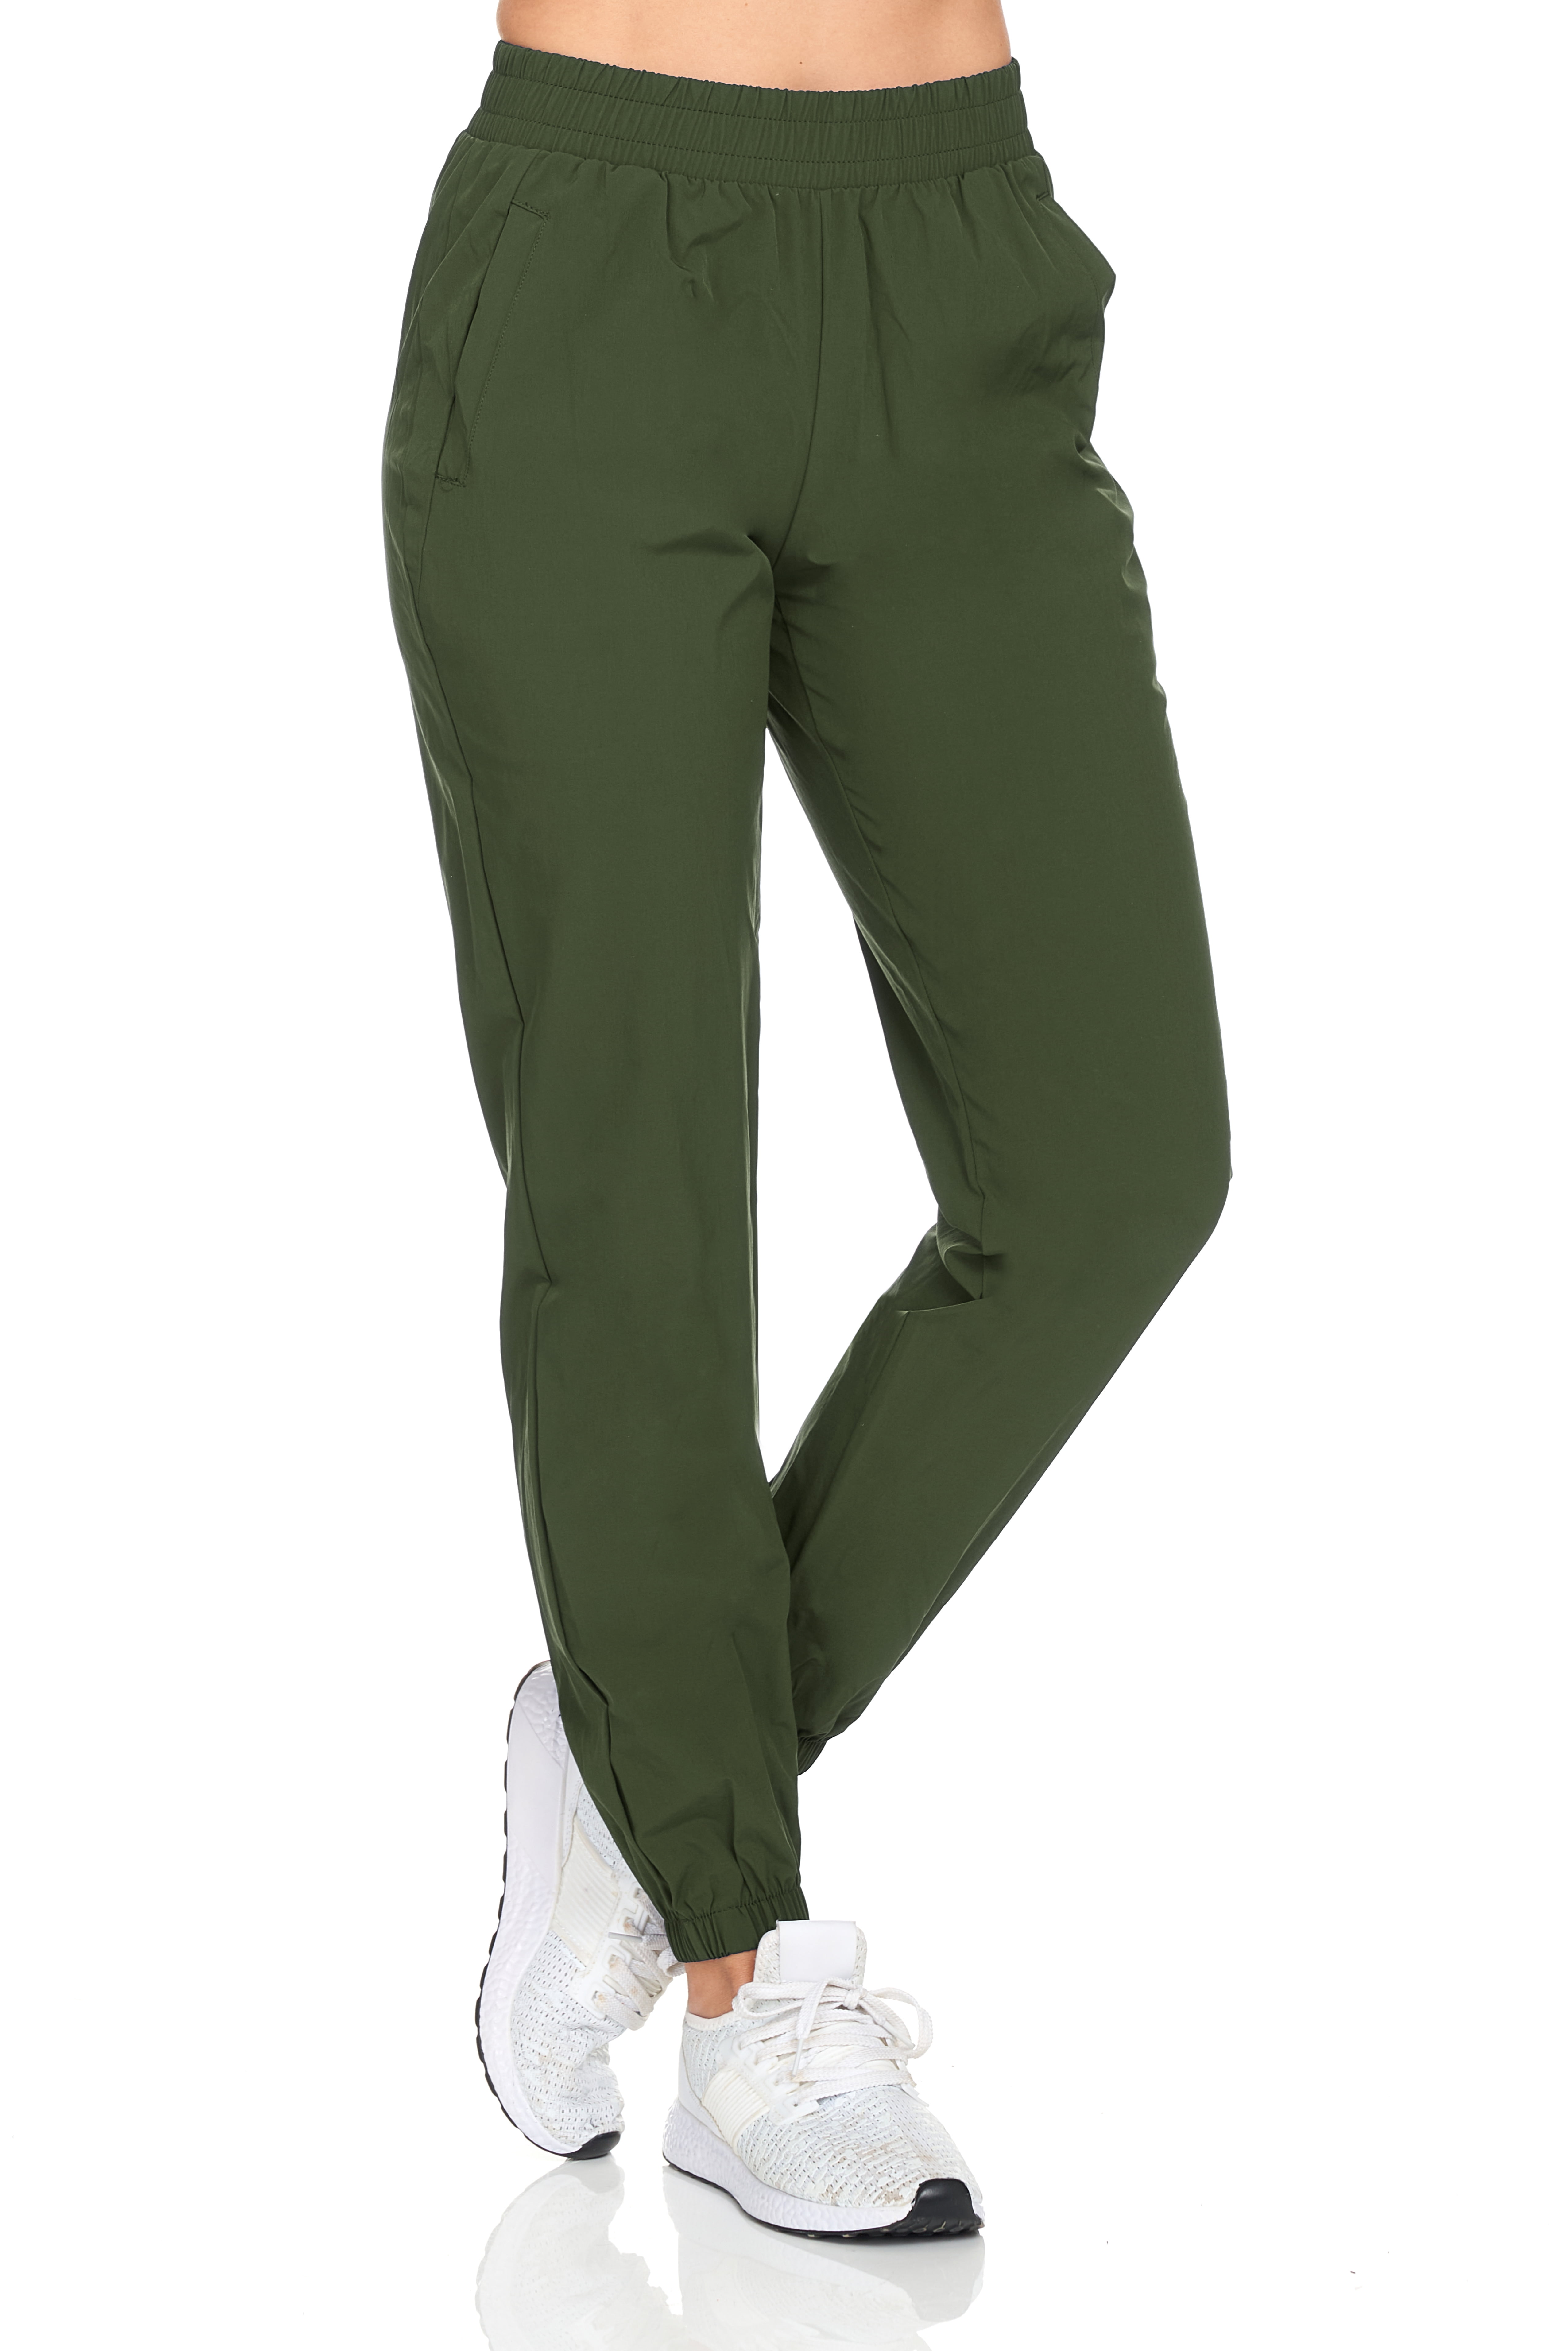 Women's Full Length Woven Jogger Pants With Pockets 